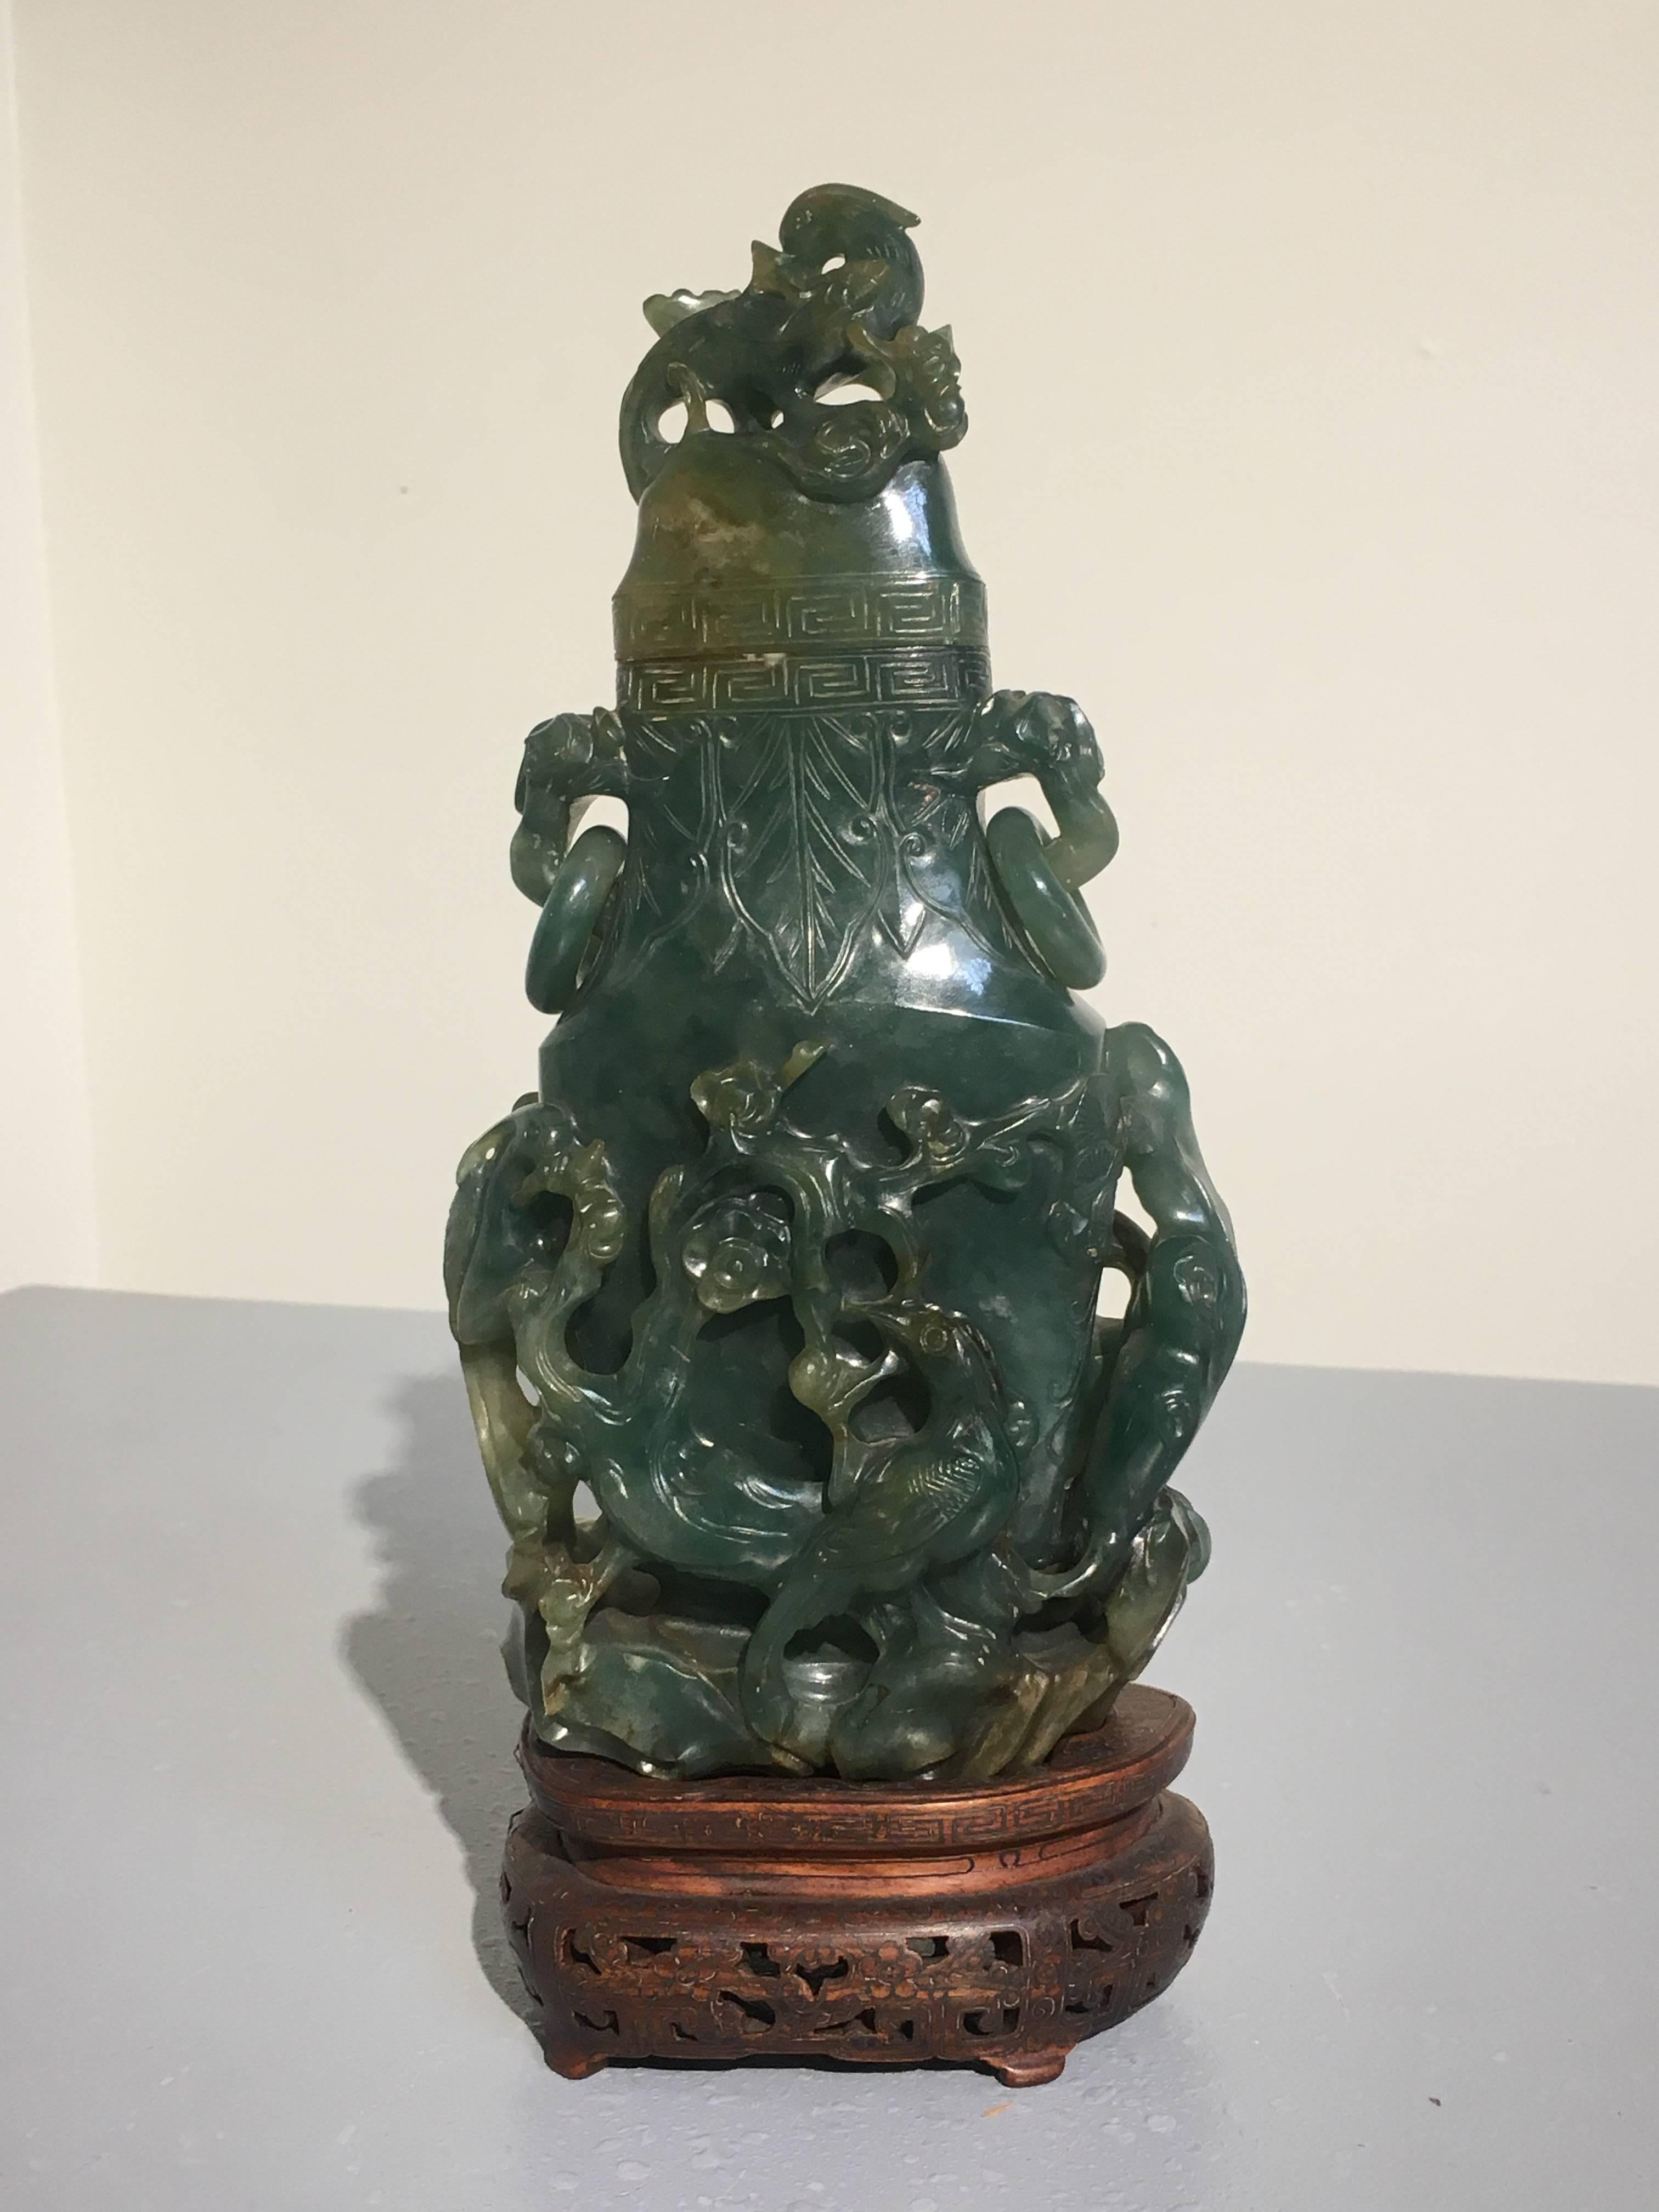 A stunning carved and pierced Chinese jade vase, Qing Dynasty, 19th century. The vase is carved with a design of birds, flowers and trees, each rife with meaning. The dense, heavy jade of a deep, mostly even bluish green color, with small areas of